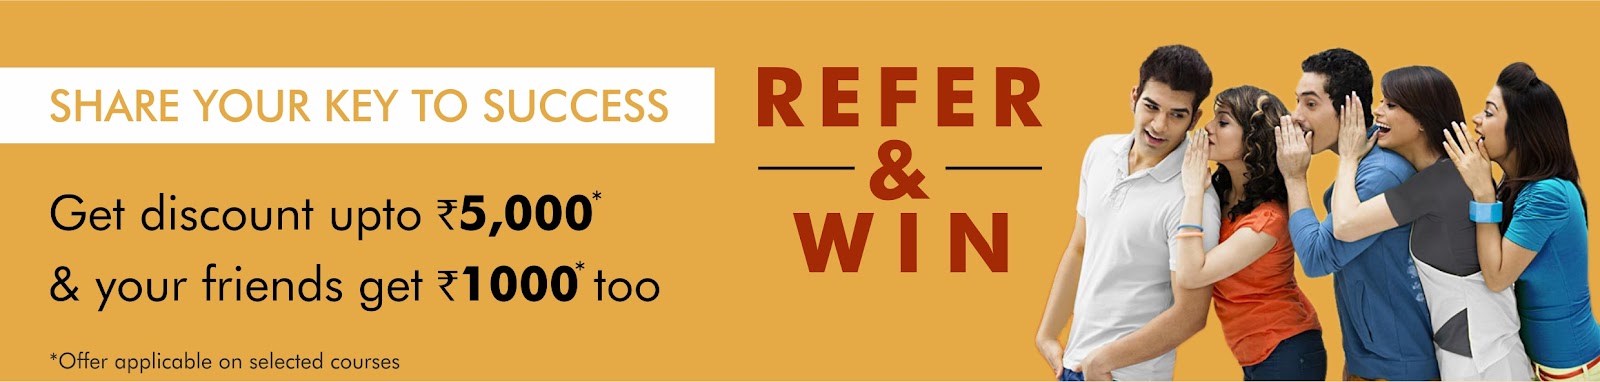 Refer and Win banner.jpg